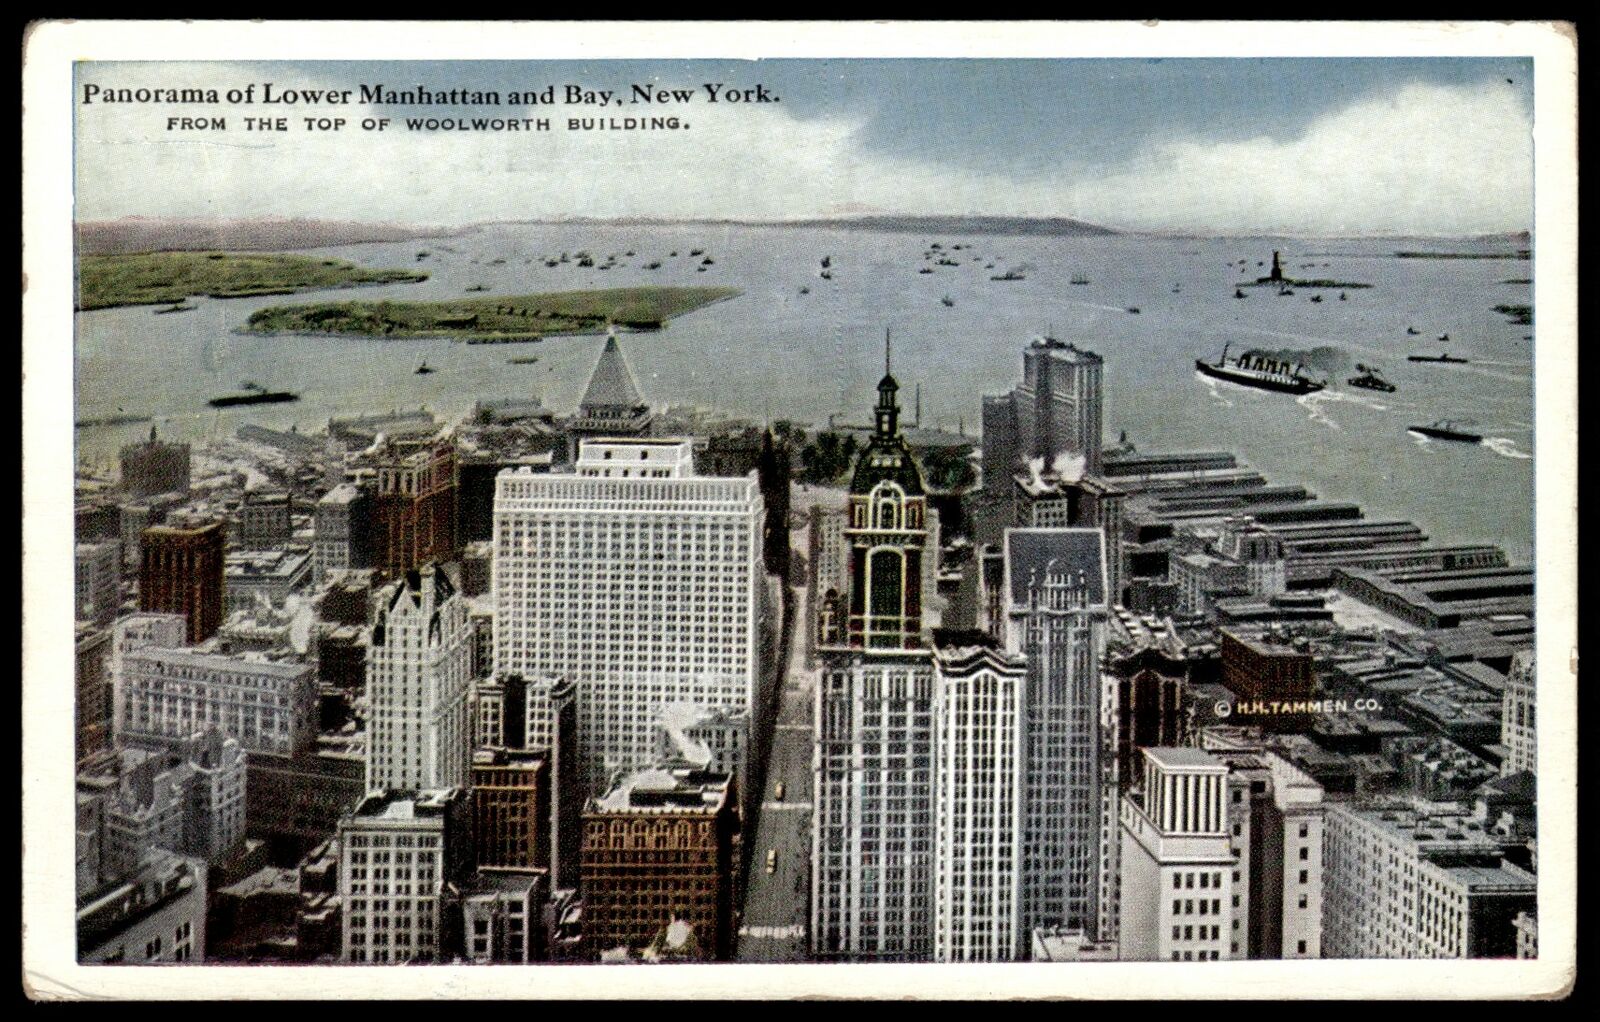 1945 Postcard Panorama of Lower Manhattan and Bay New York from the top of